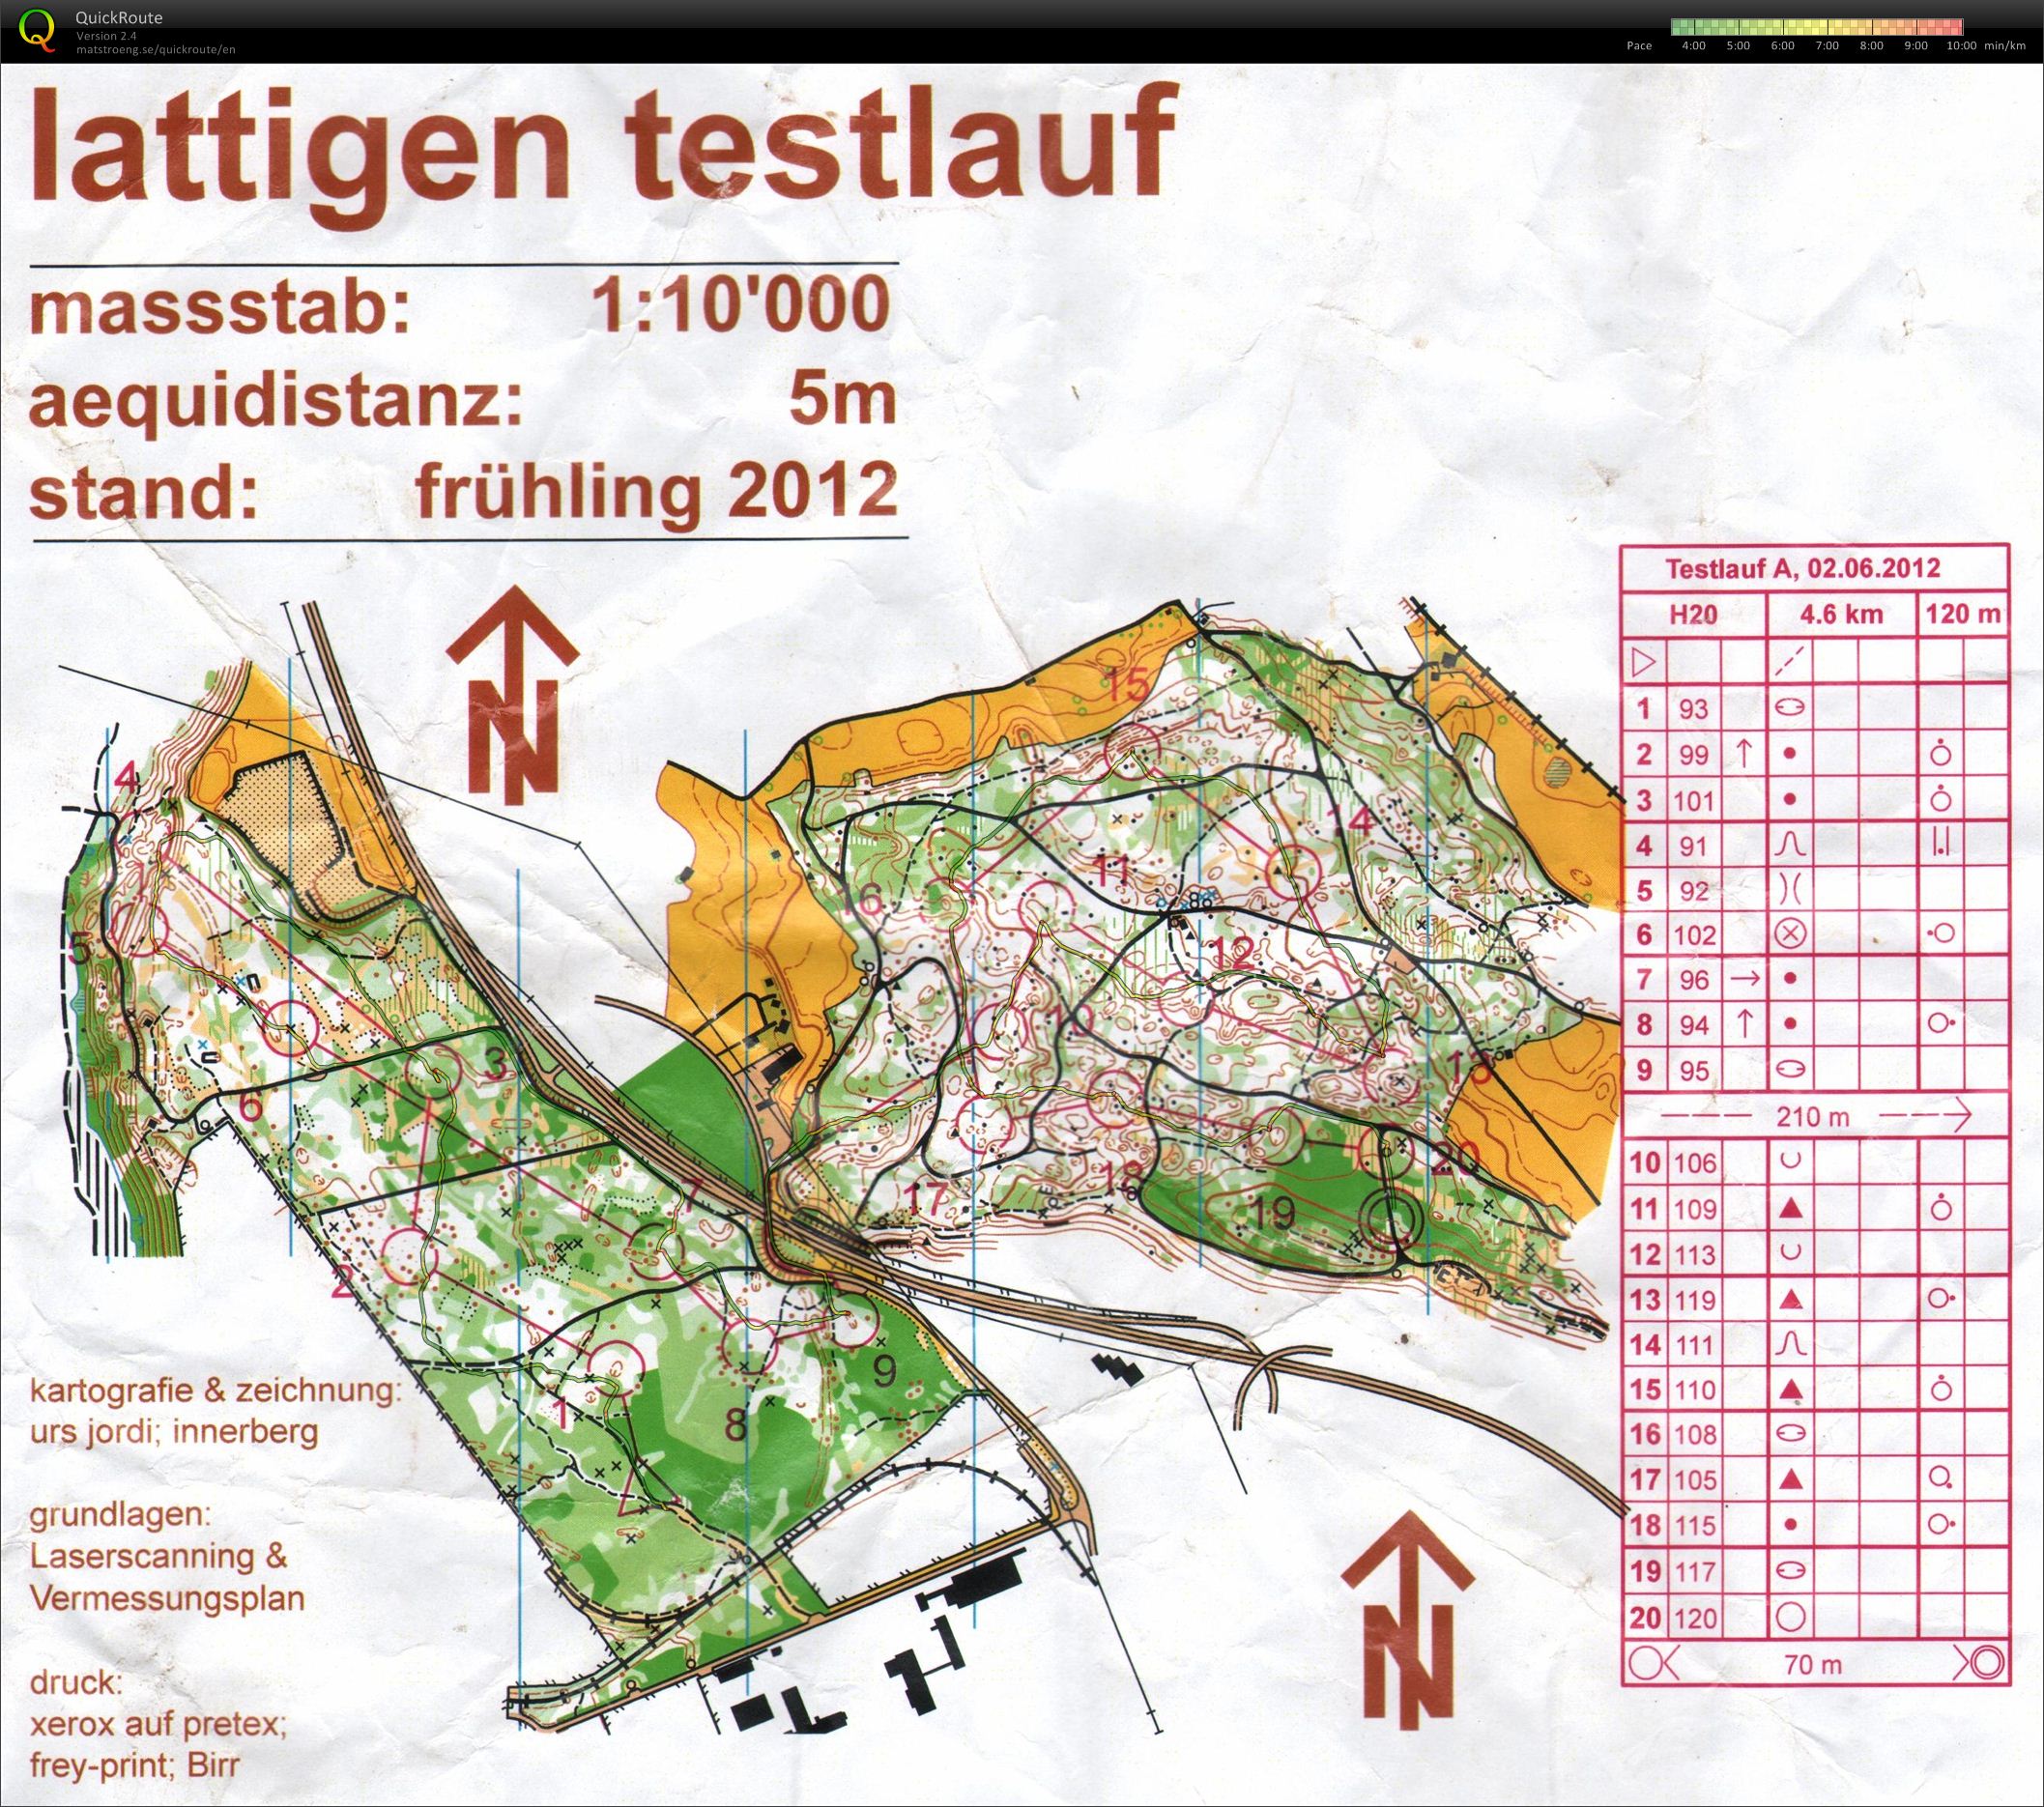 Swiss JWOC Selection Middle (02-06-2012)